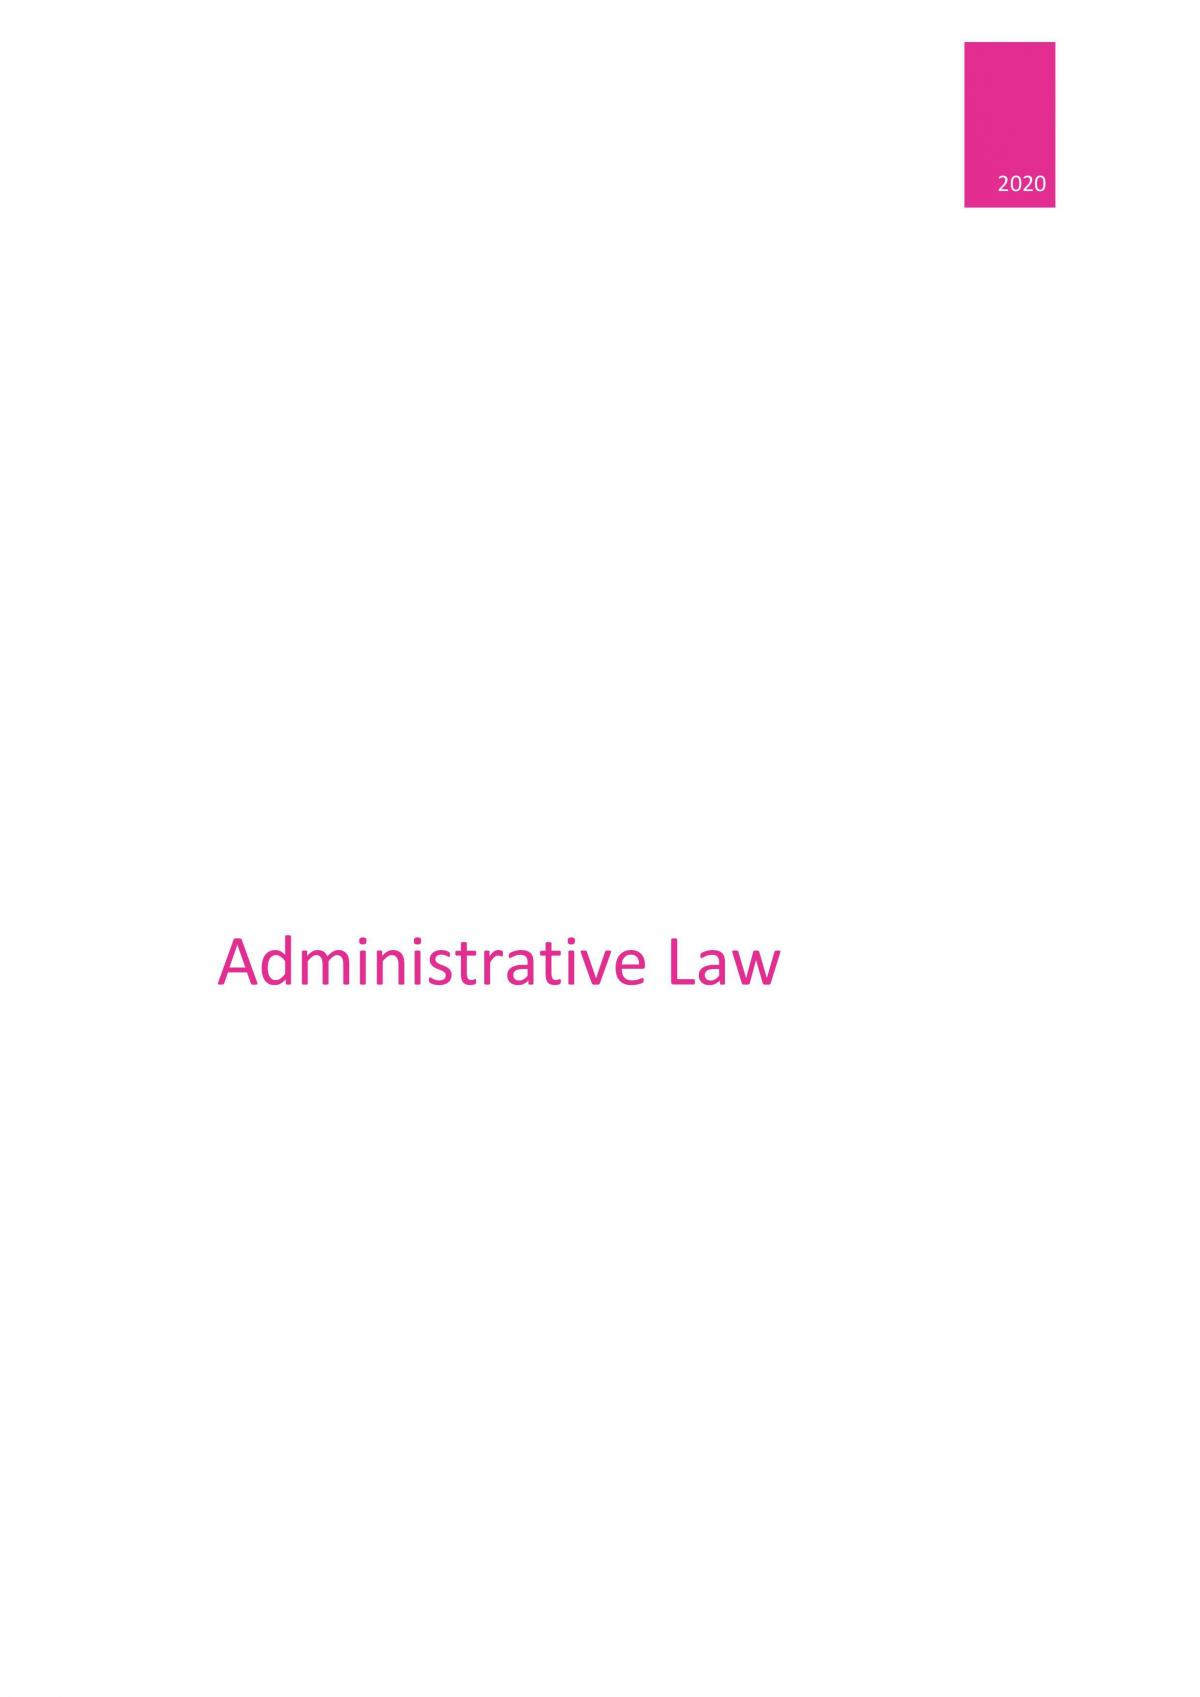 LAW4331 Exam notes (Administrative Law) - Page 1